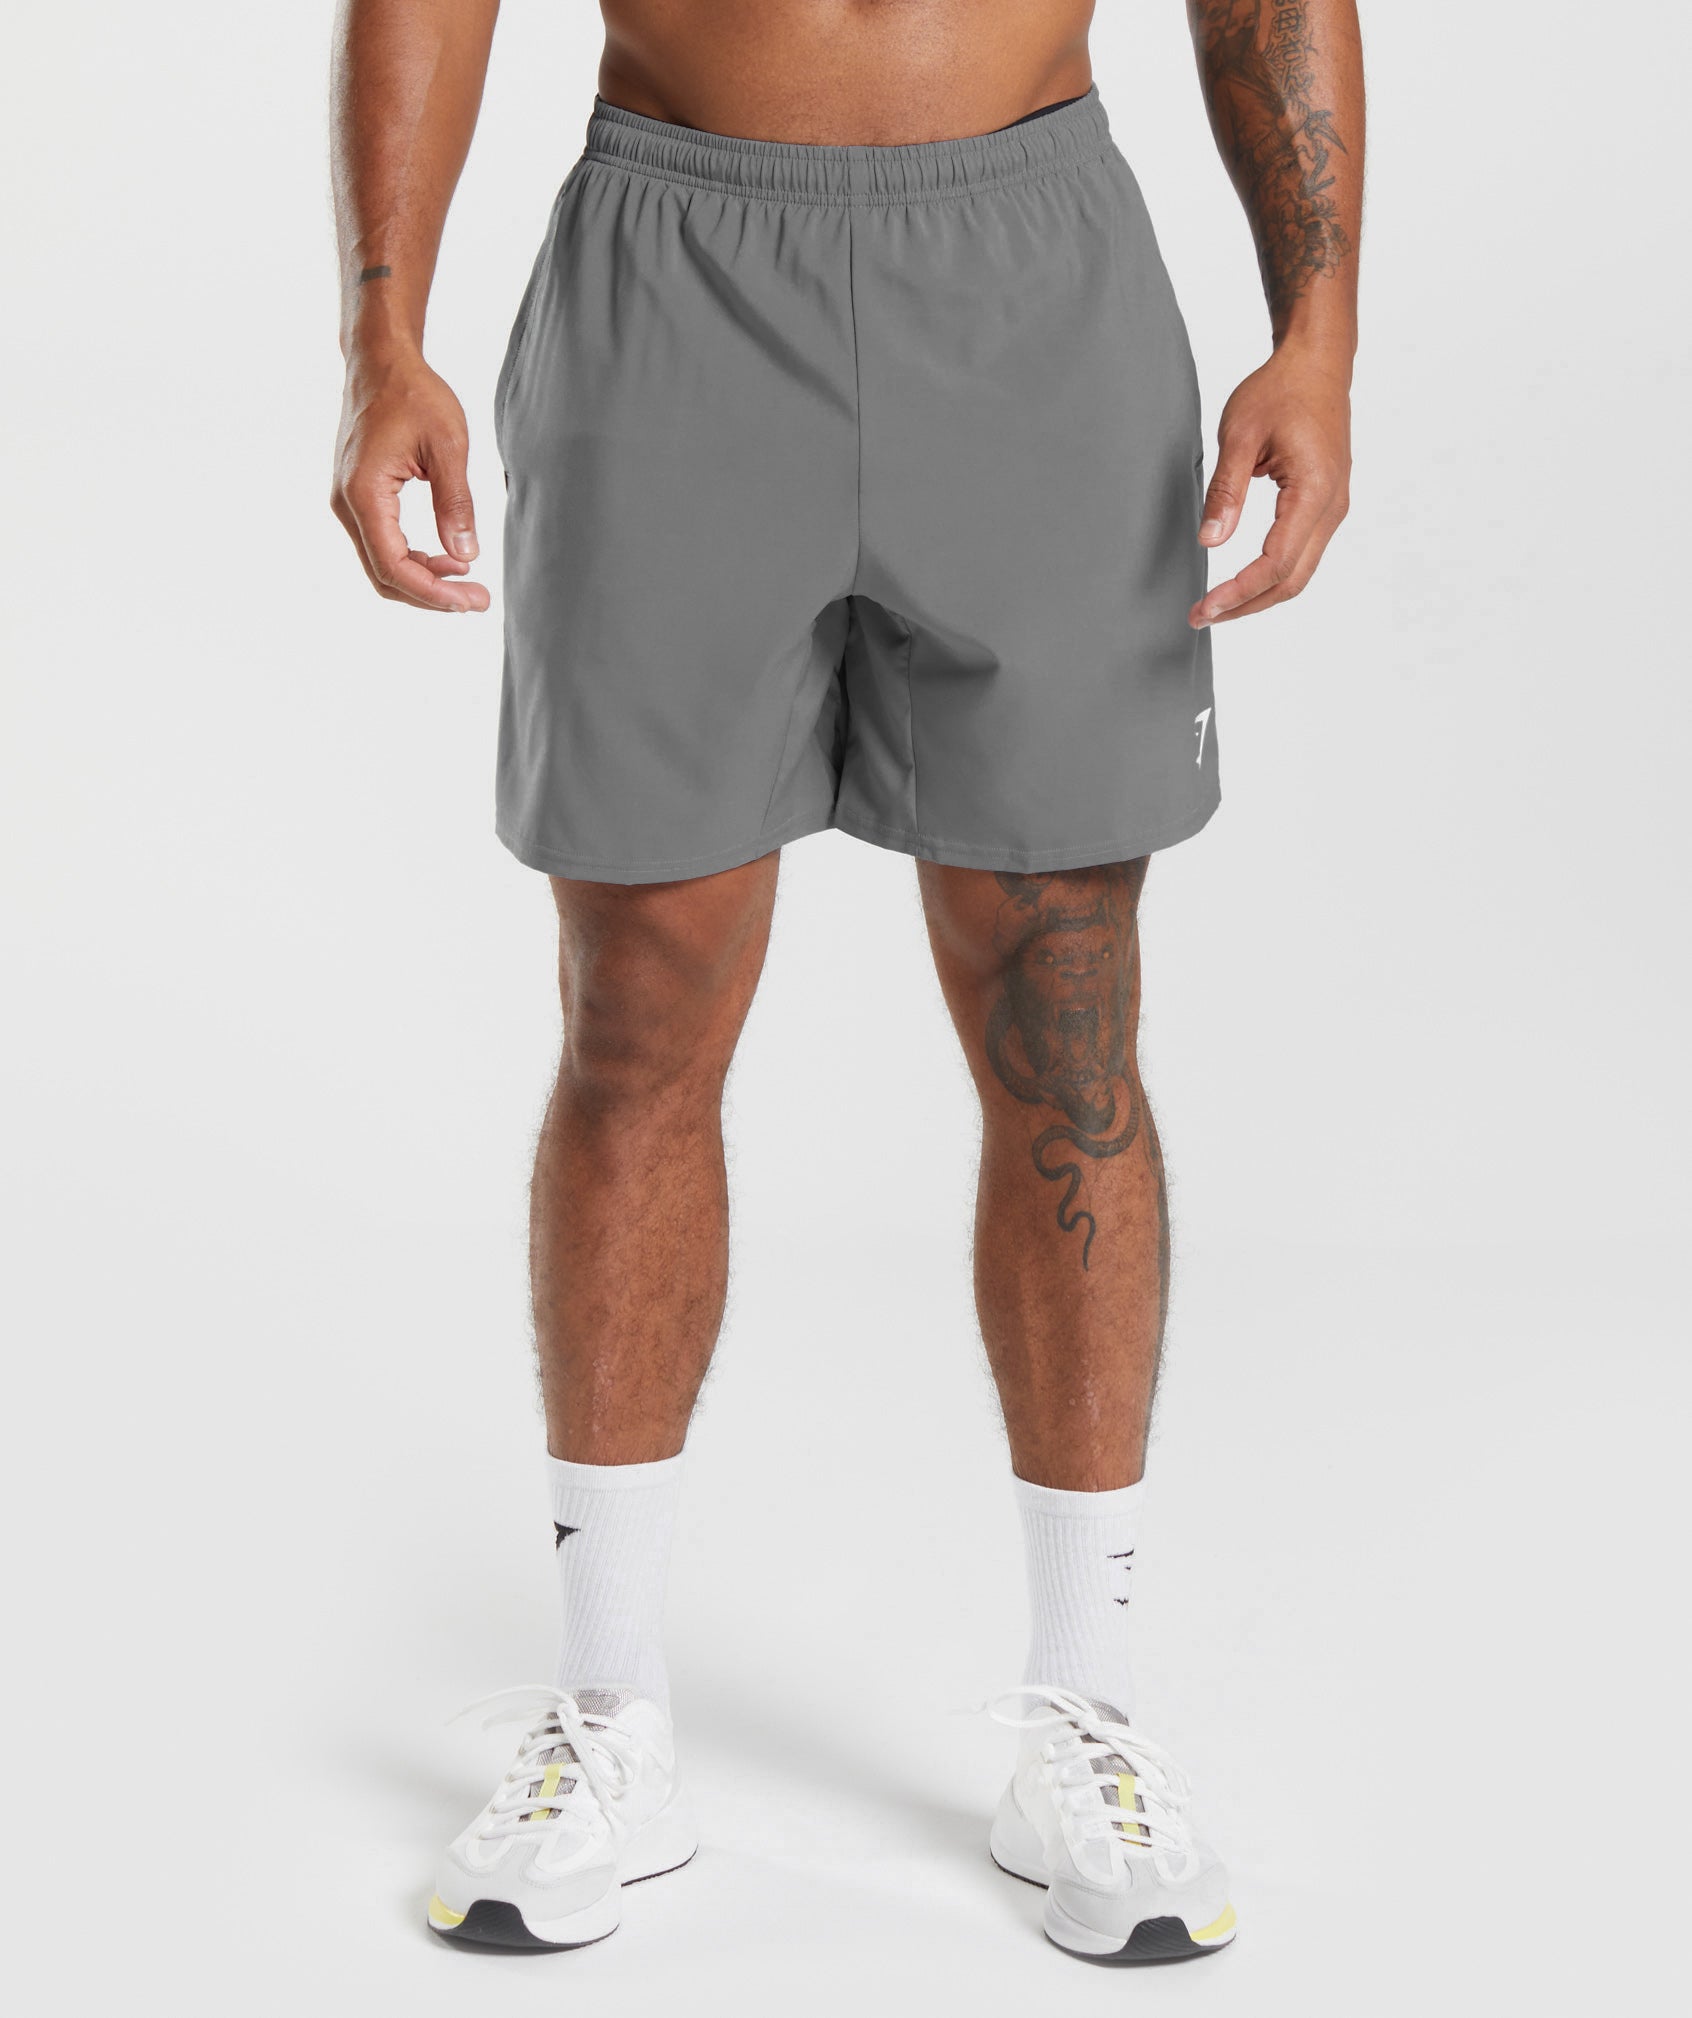 Arrival 7" Shorts in Charcoal Grey